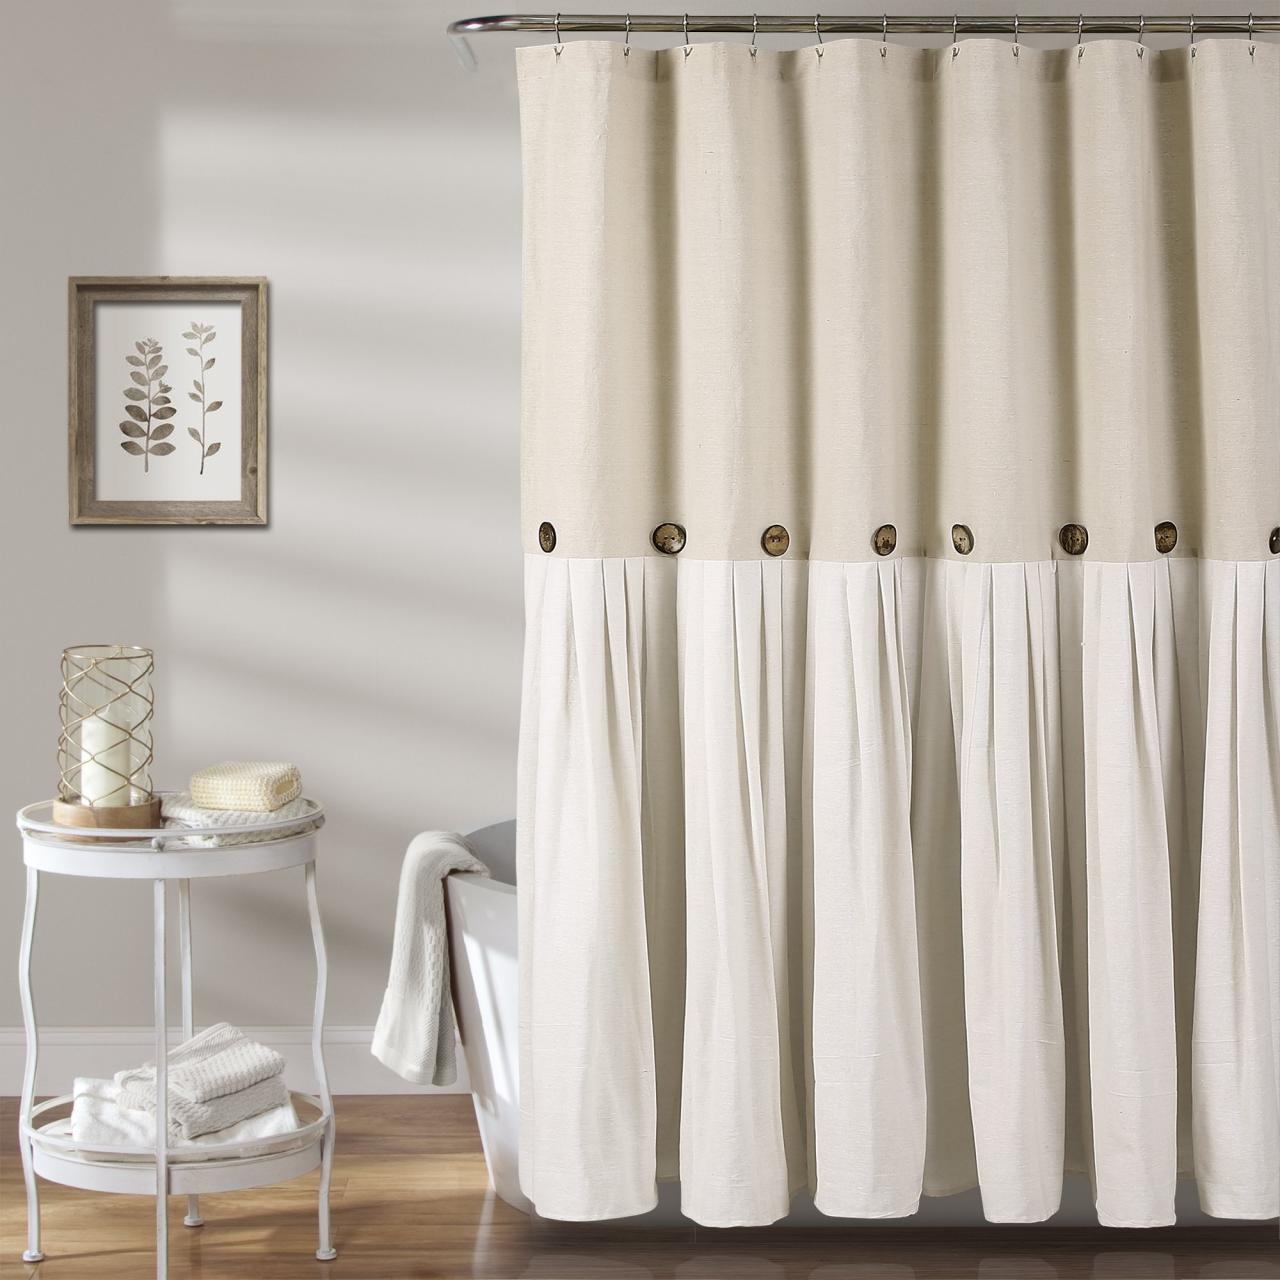 Add the elegance of linen to your bathroom with this chic shower